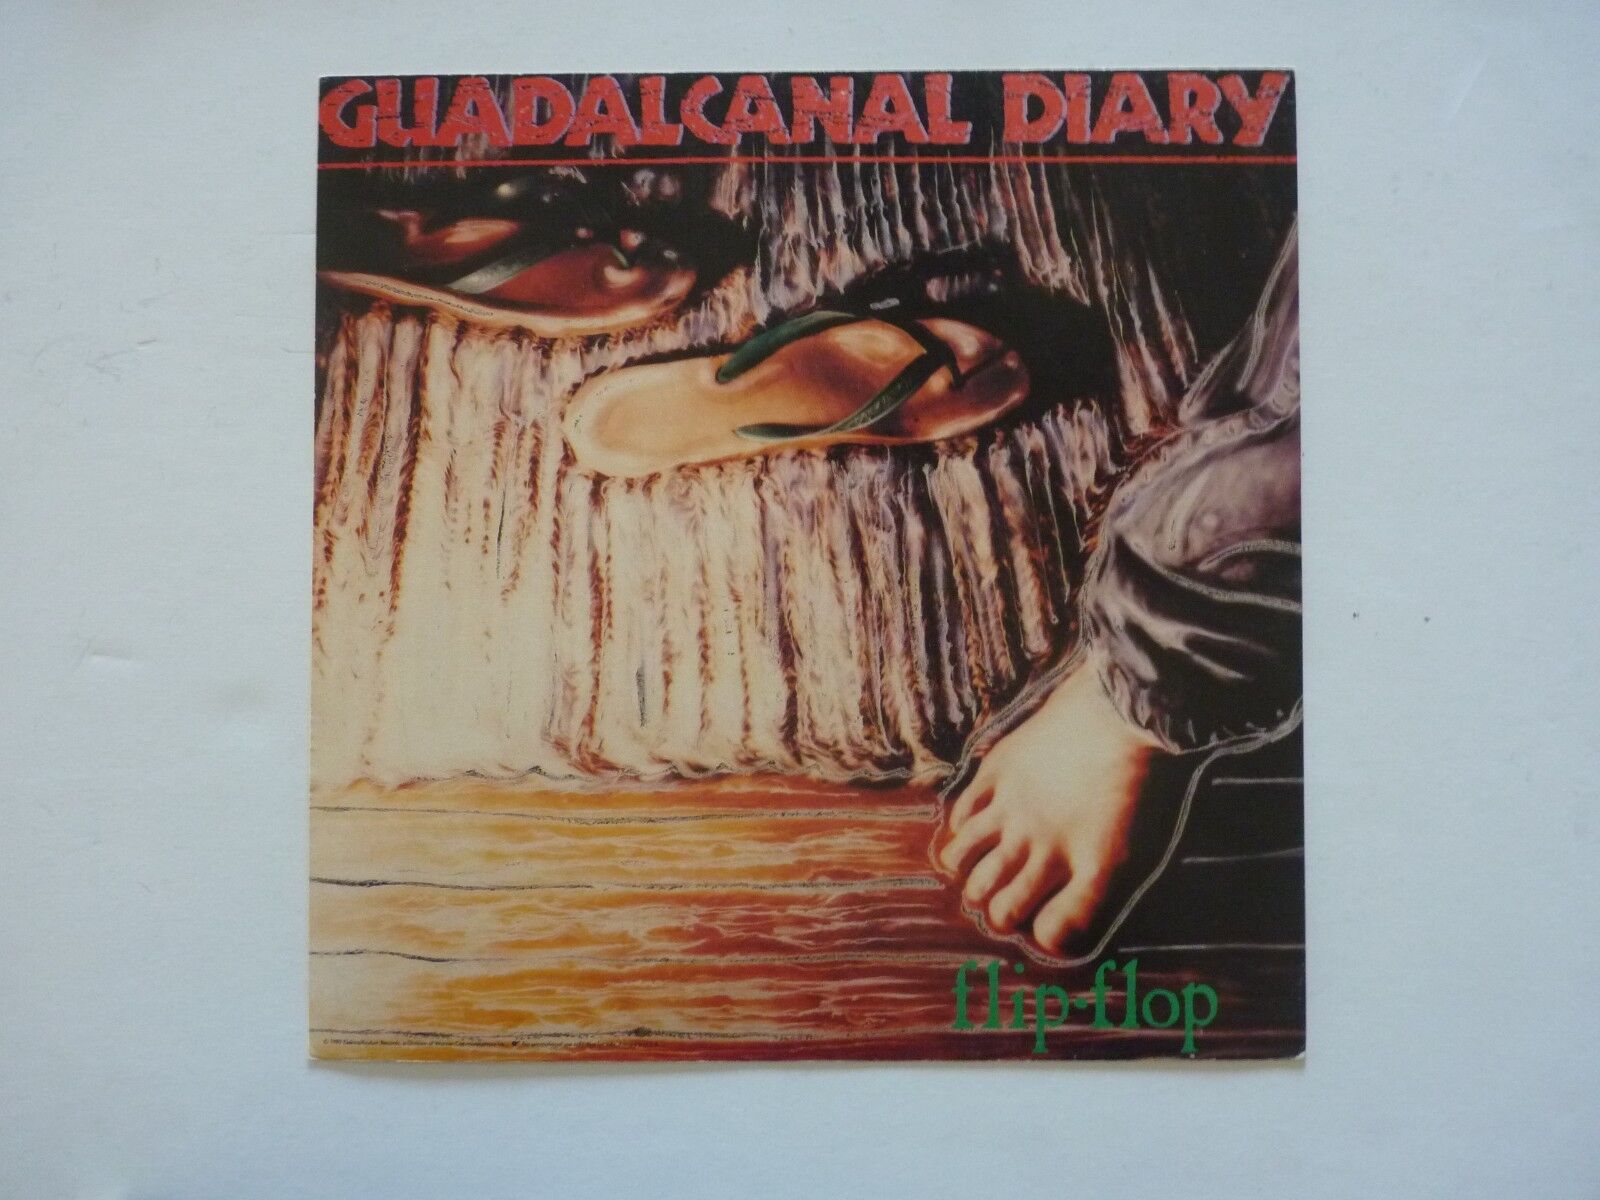 Guadalcanal Diary Flip Flop LP Record Photo Poster painting Flat 12x12 Poster